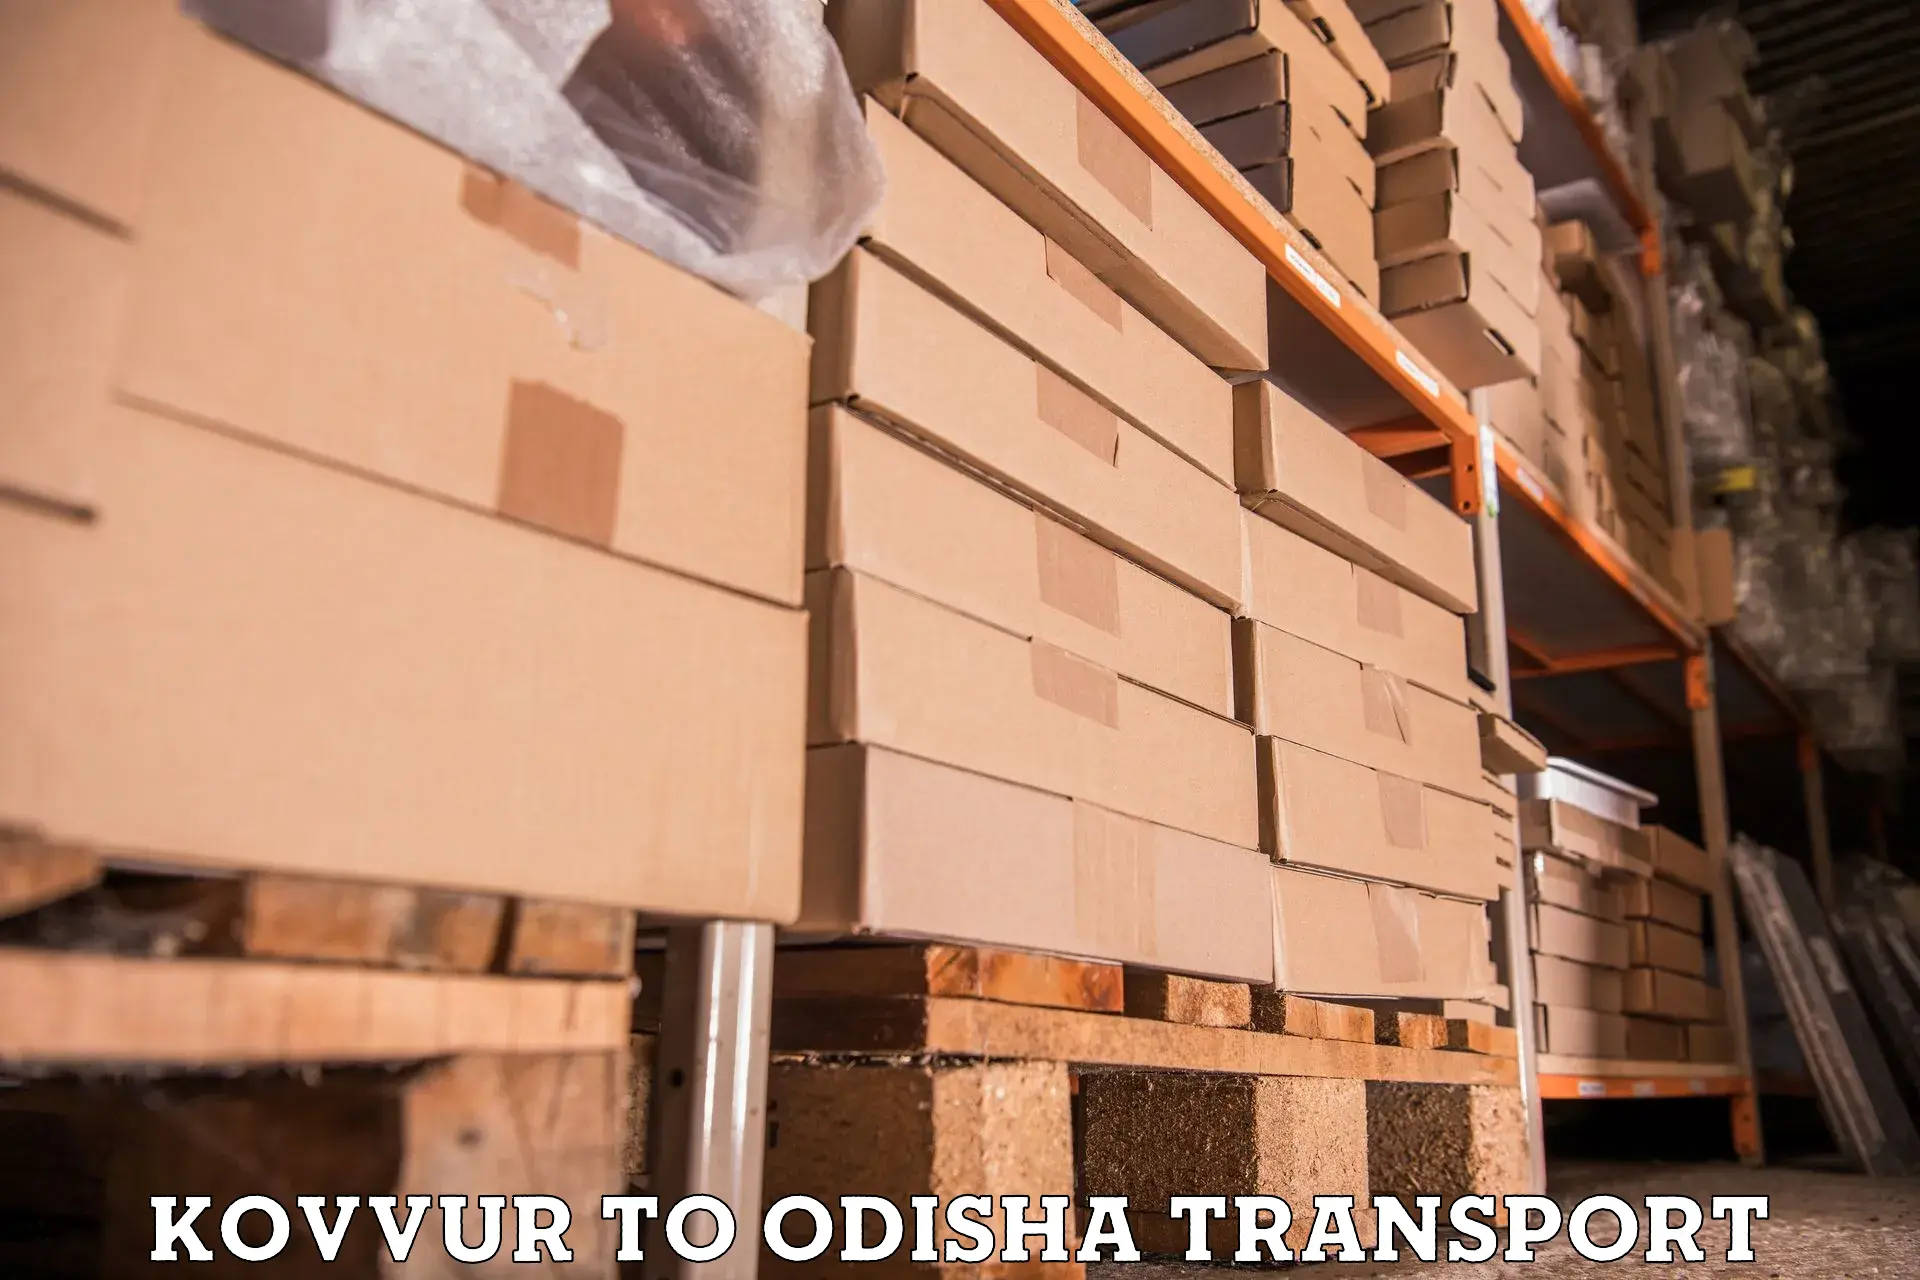 Container transport service Kovvur to Boudh